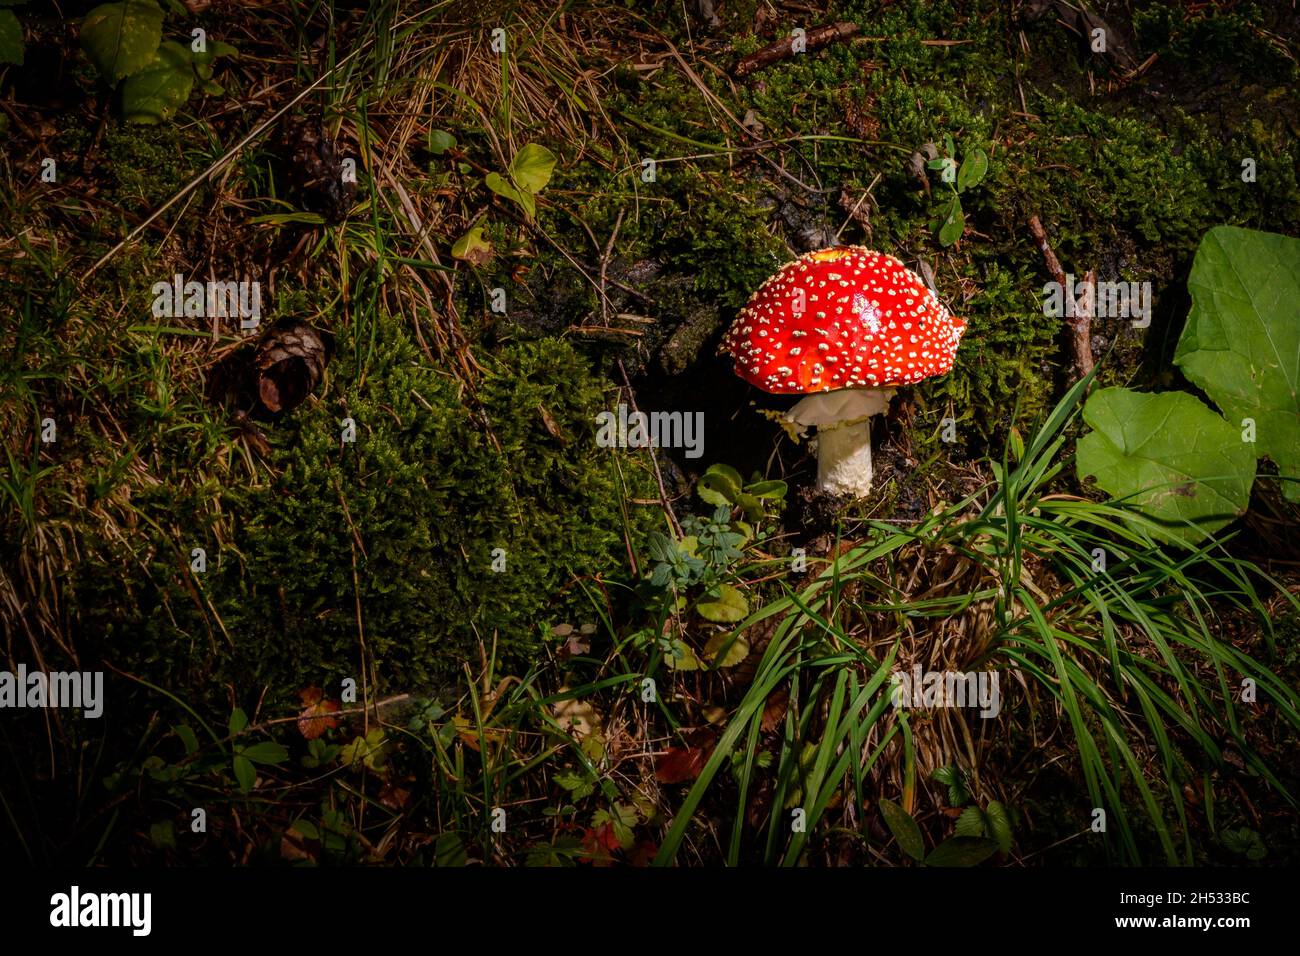 Amanita muscaria, commonly known as the fly agaric mushroom Stock Photo